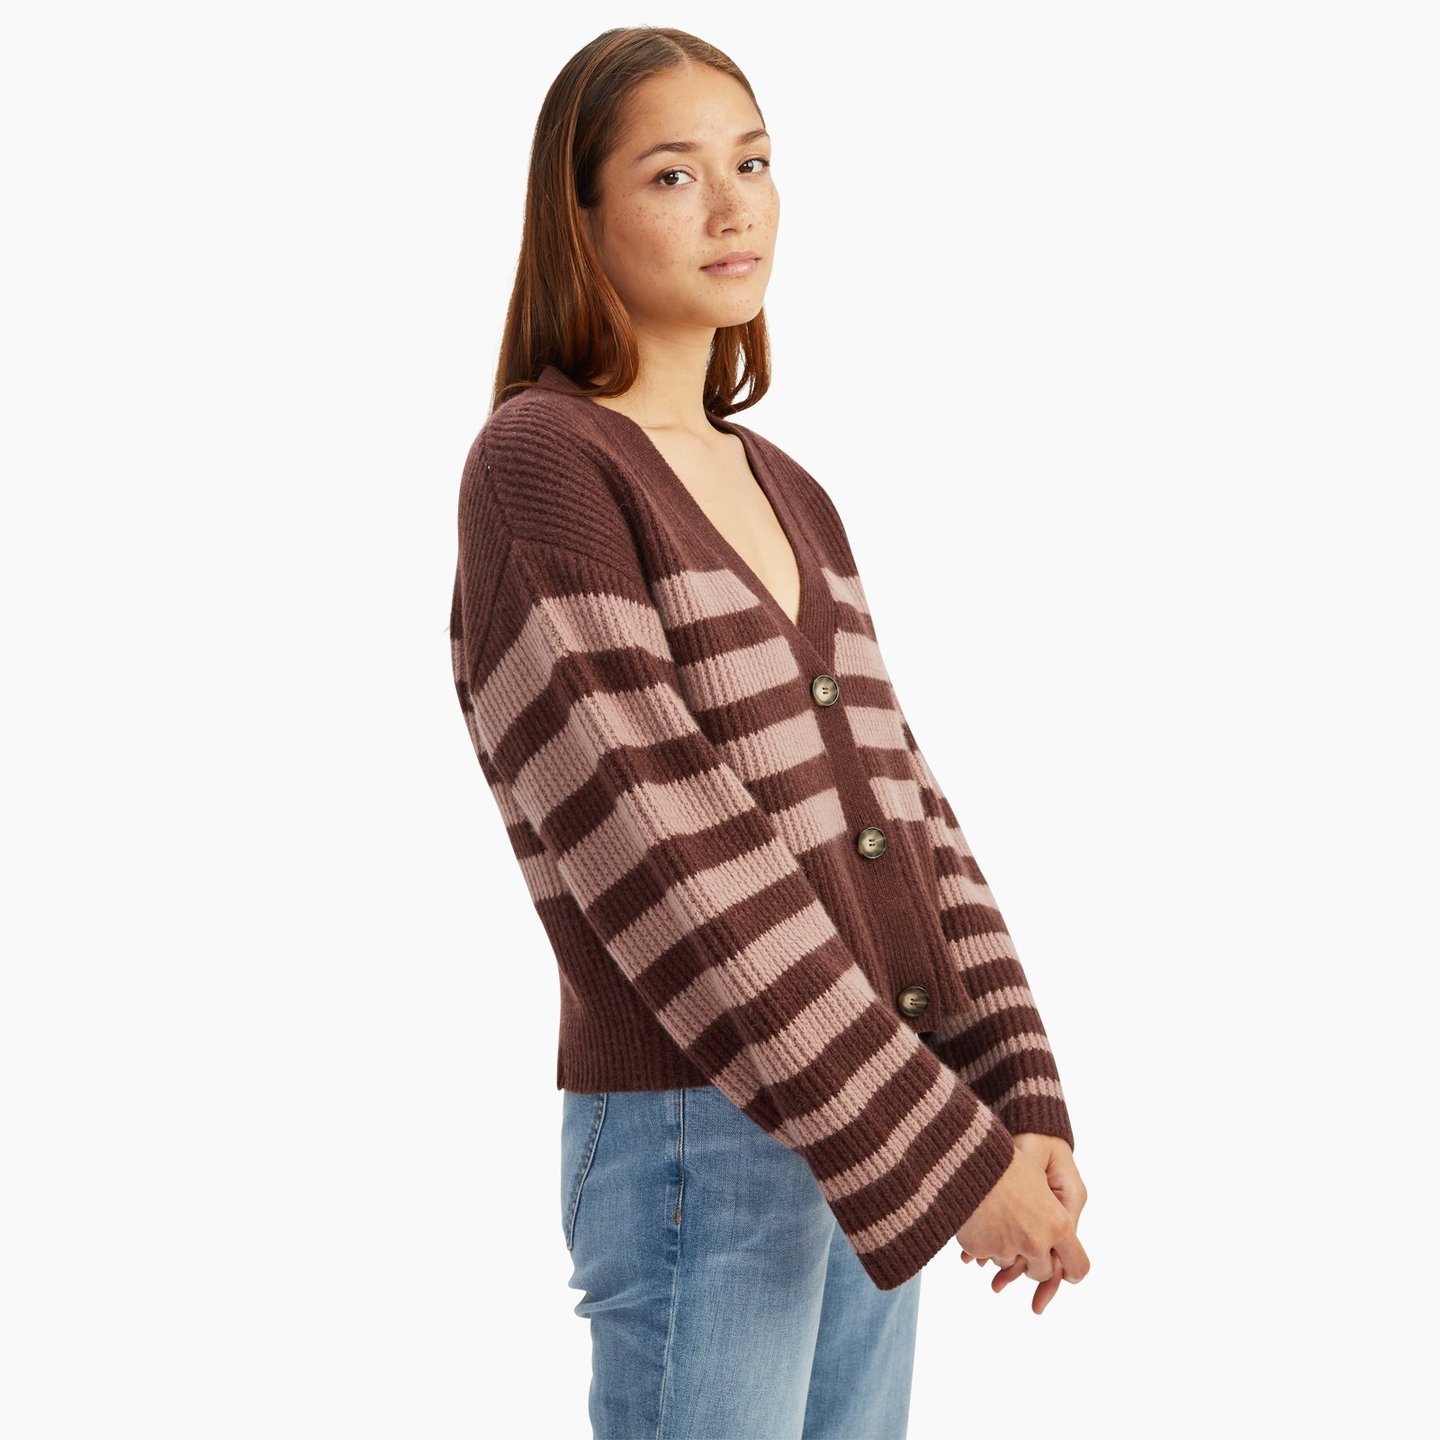 NWEG000826_Luxe_Cashmere_Striped_Cropped_Cardigan_Chocolate_Brown_010_1440x.jpg